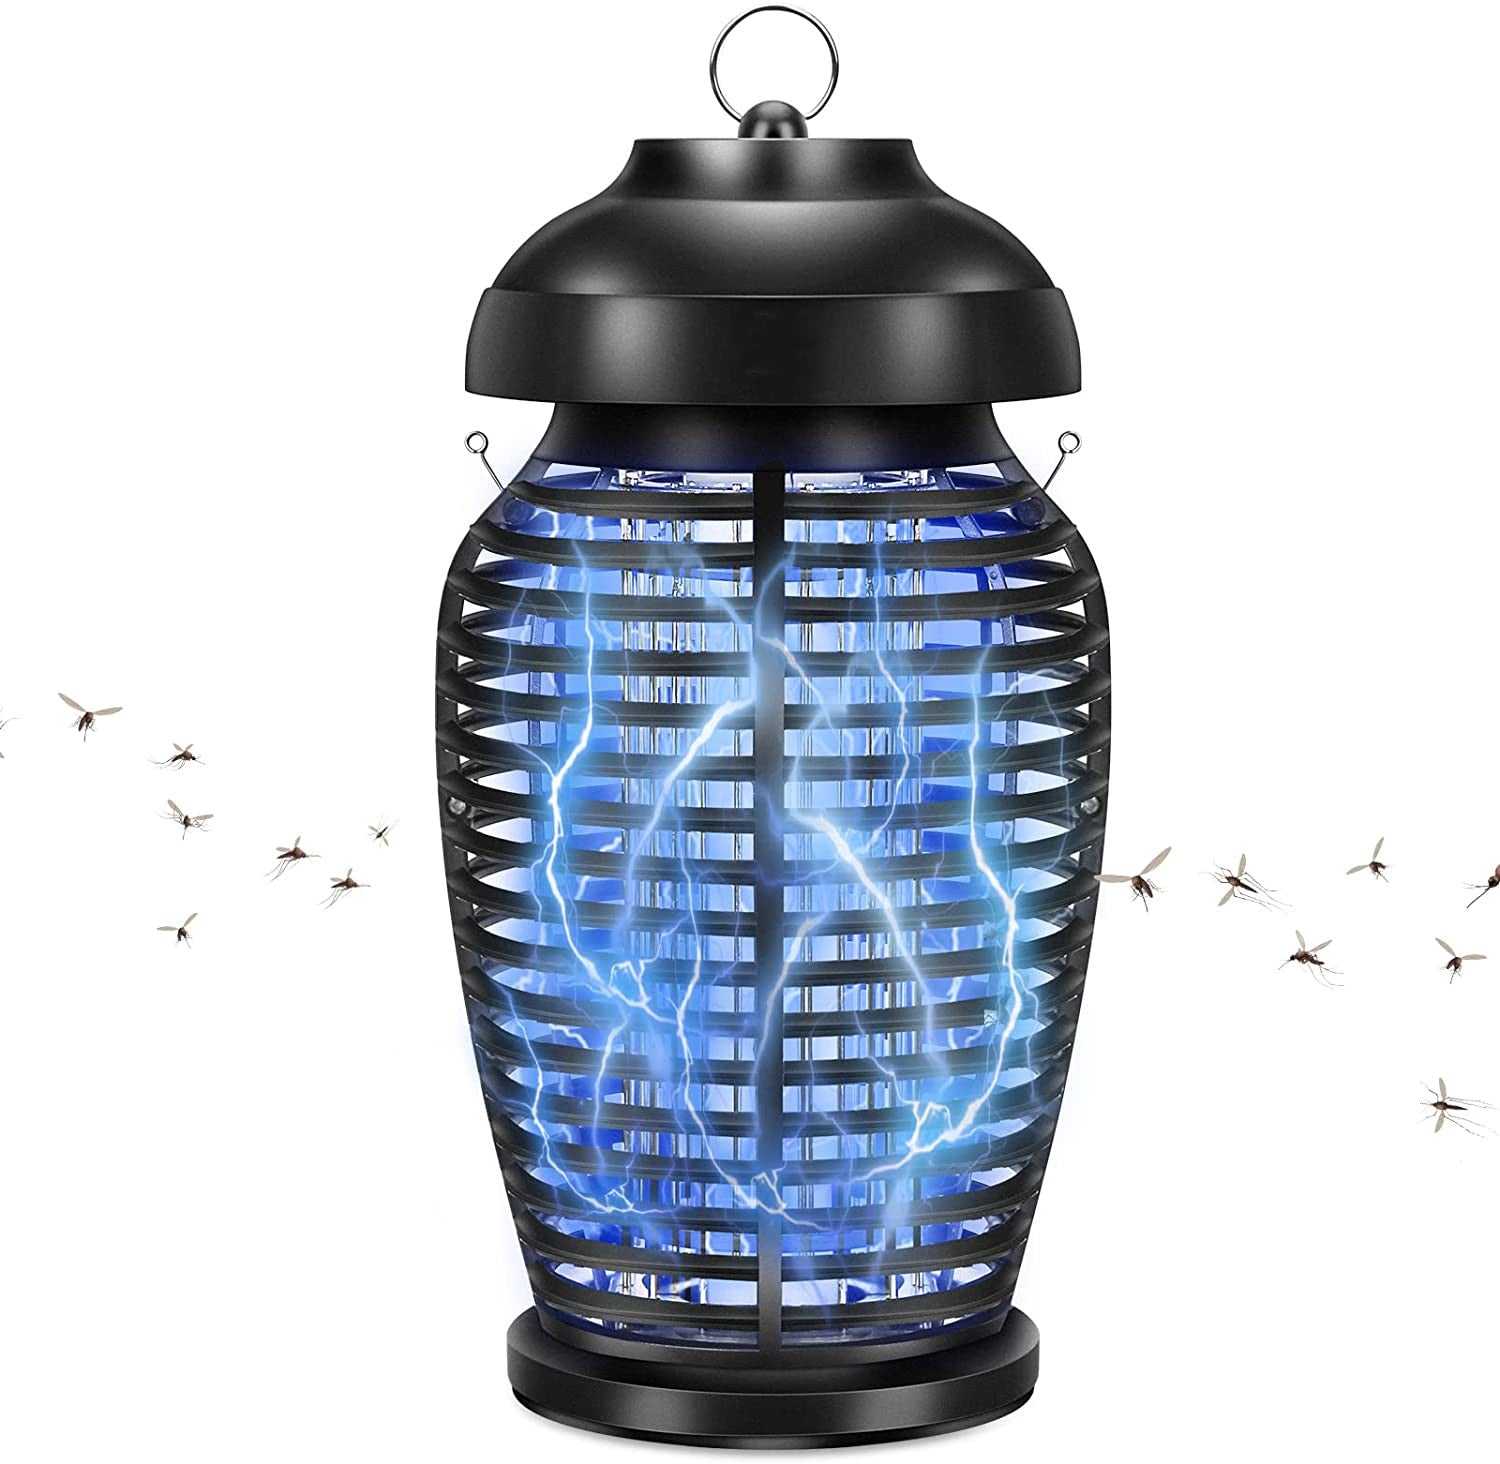 4200V Electric Bug Zapper, Fly Trap, Mosquito Exterminator Indoor Outdoor, Mosquito Repellent Trap, Insect Killer with 18W UV Bulb, Stainless Hangable Chain and Ring, for Home Use, Backyard